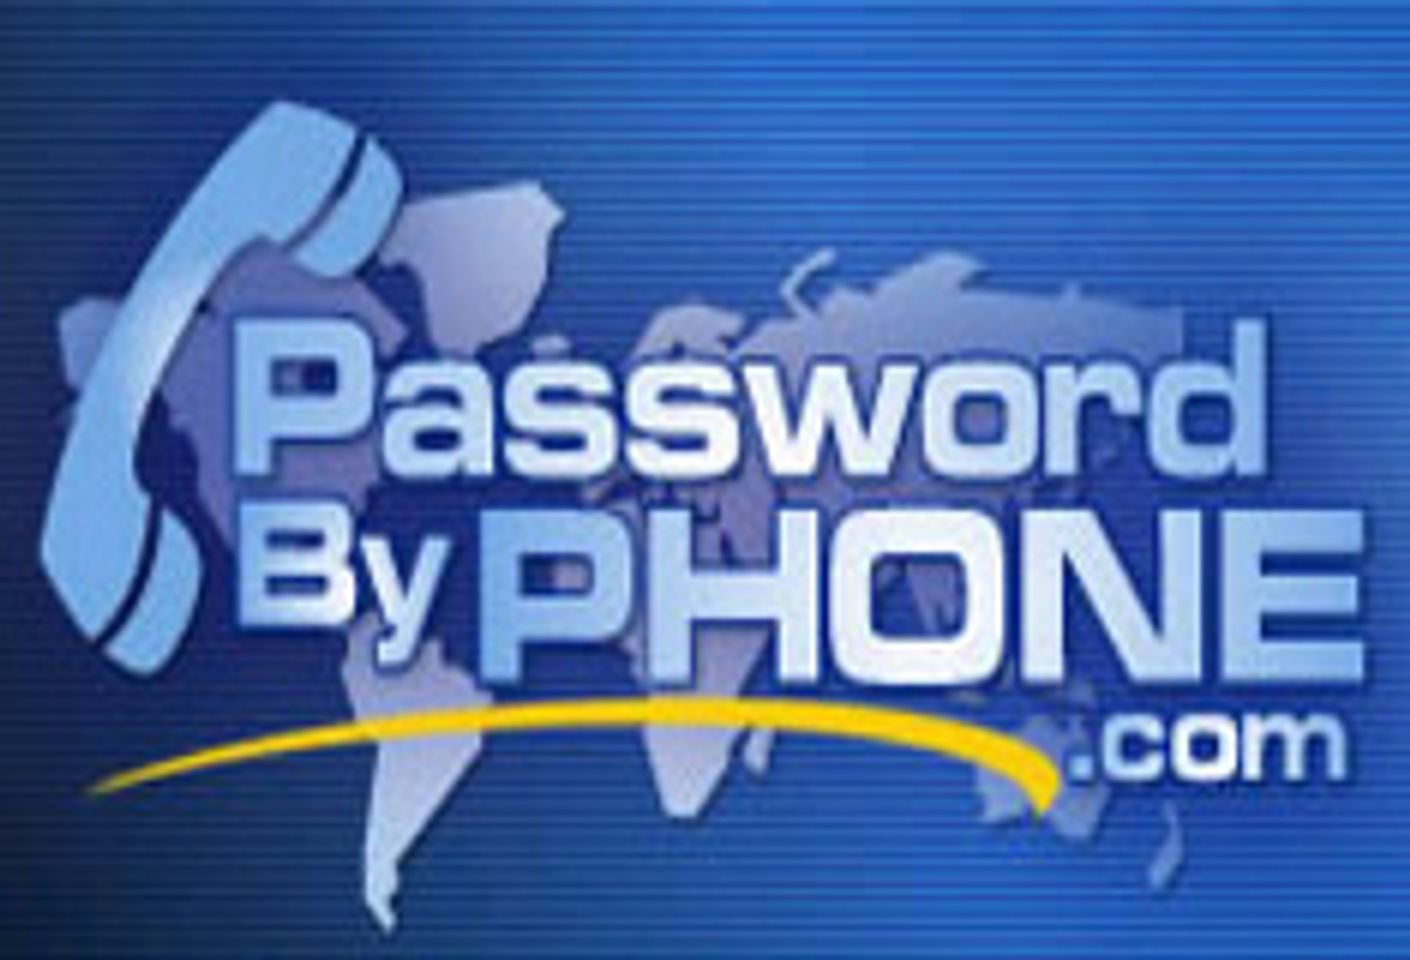 Password-by-Phone Helping Affiliates Go Global